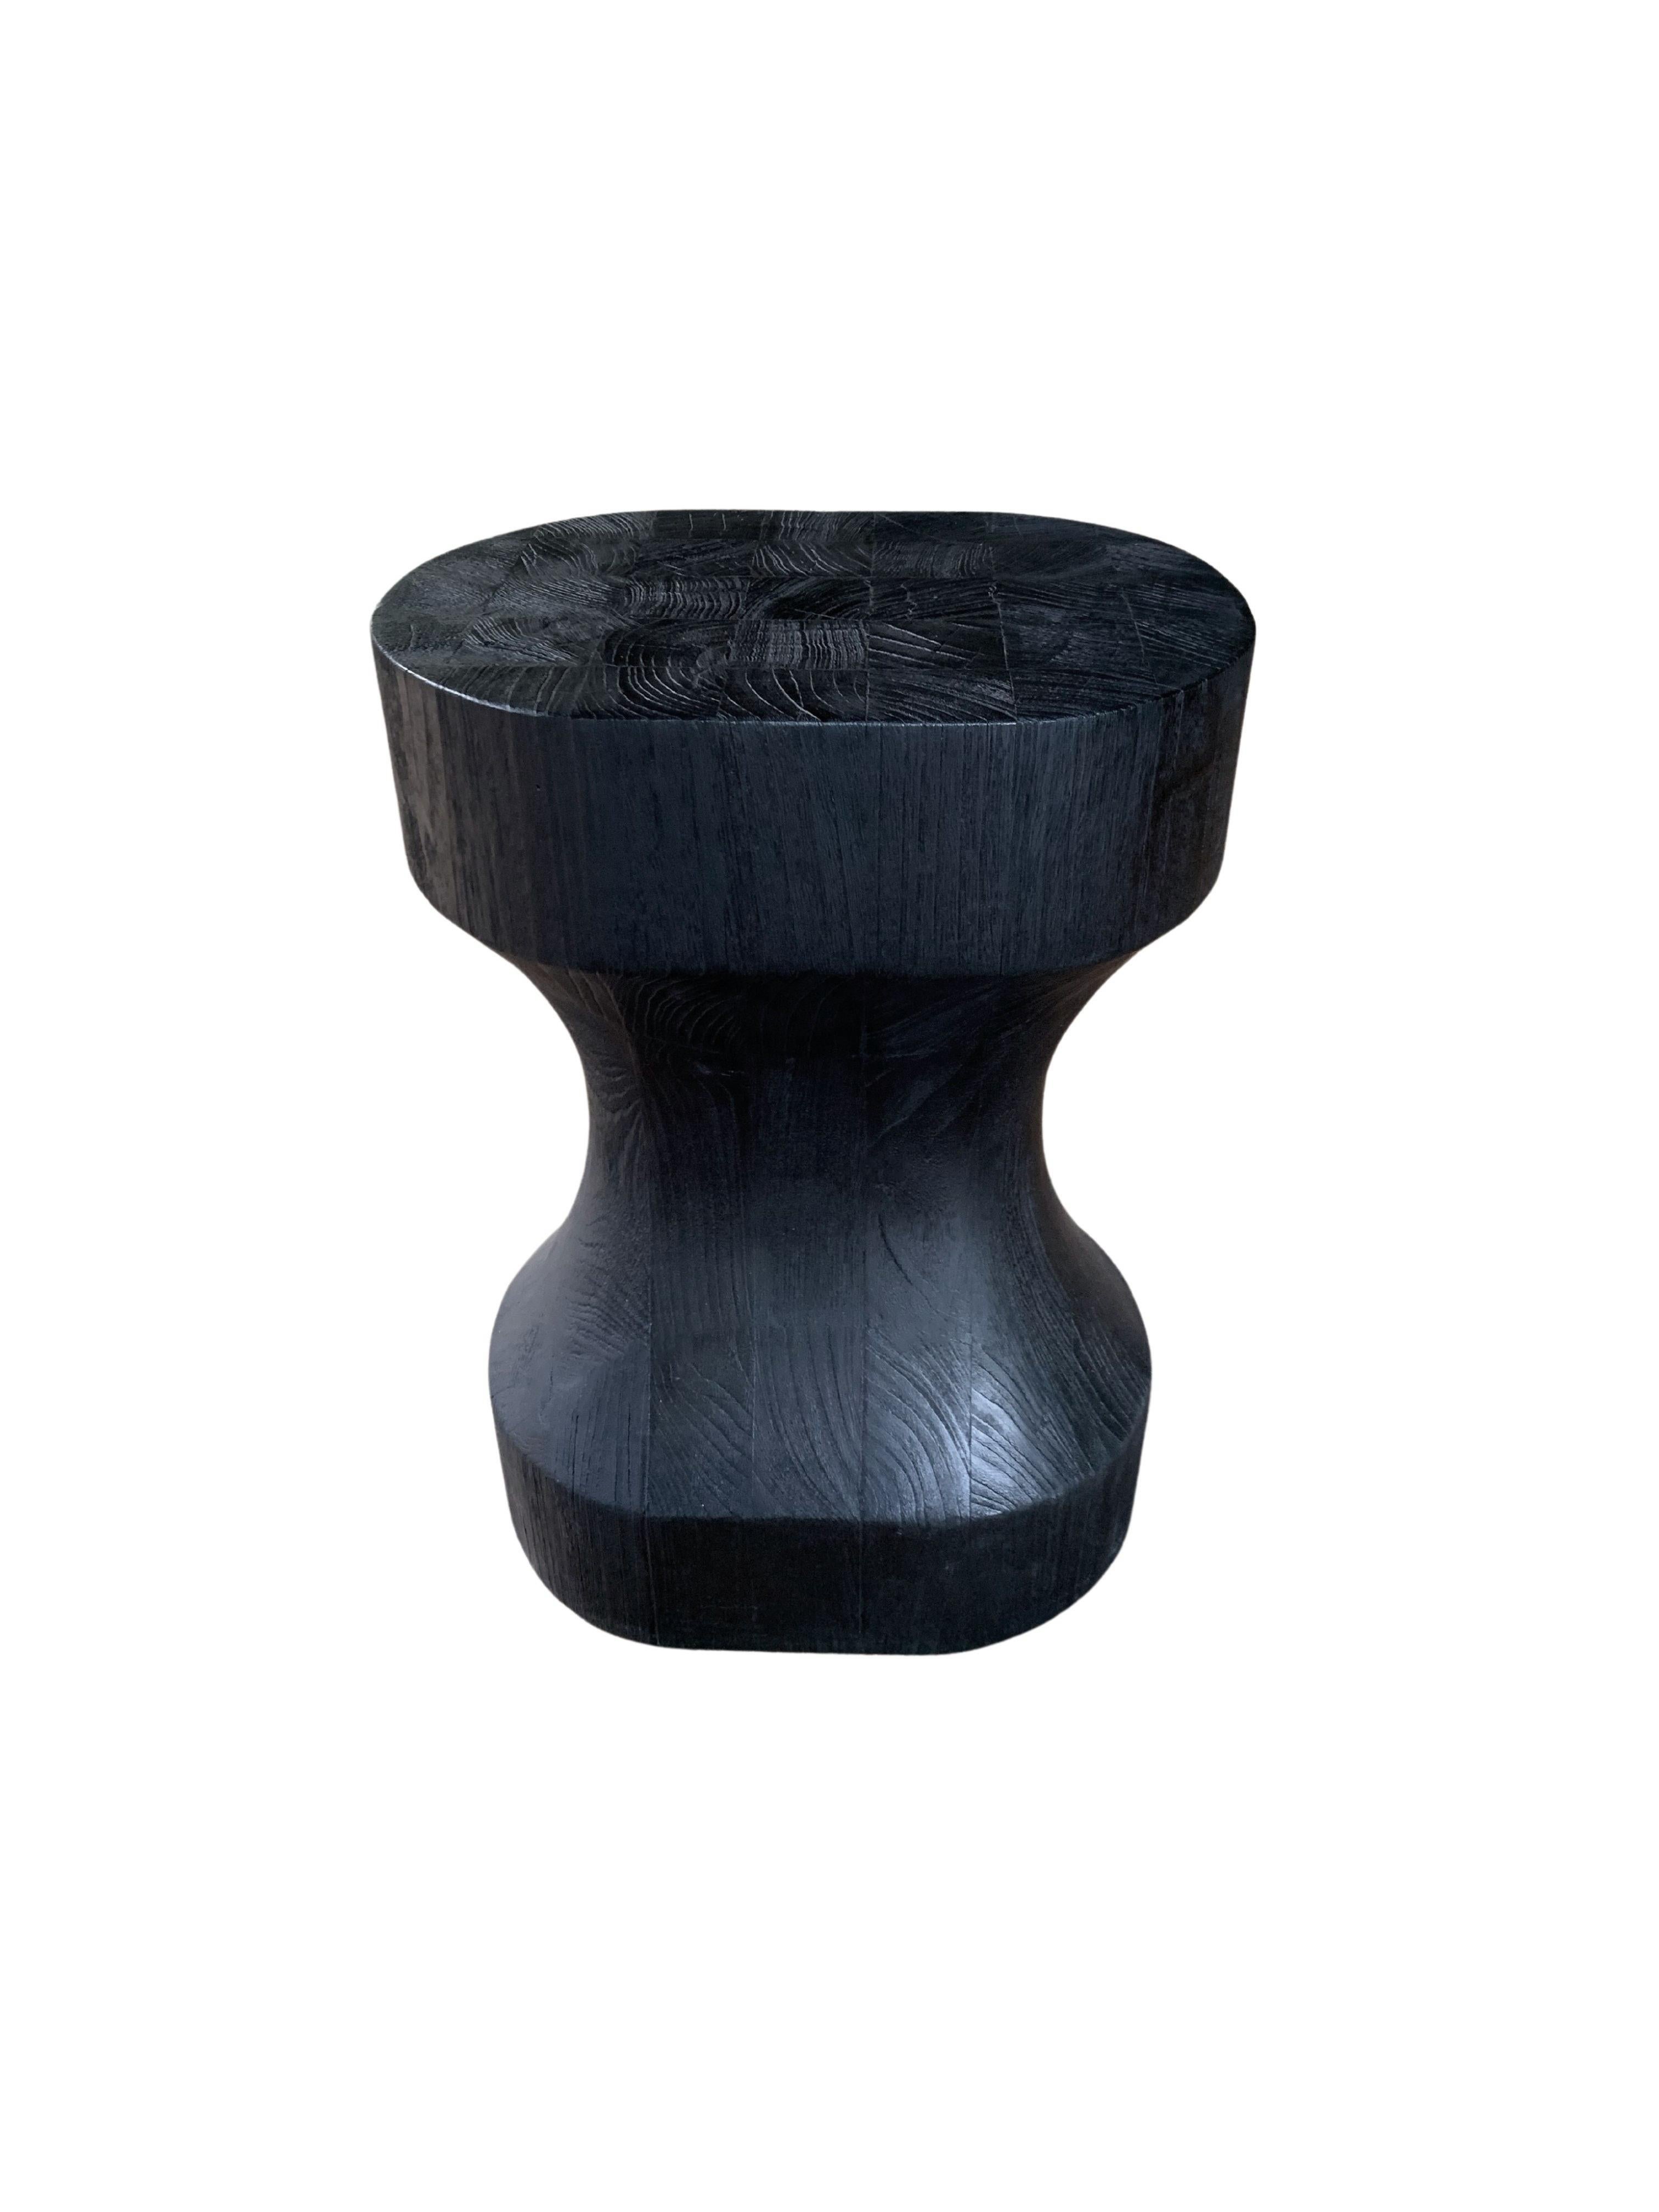 A wonderfully sculptural round stool. Its neutral pigment and subtle wood texture makes it perfect for any space. A uniquely sculptural and versatile piece certain to invoke conversation. It was crafted from teak wood and has a smooth texture and